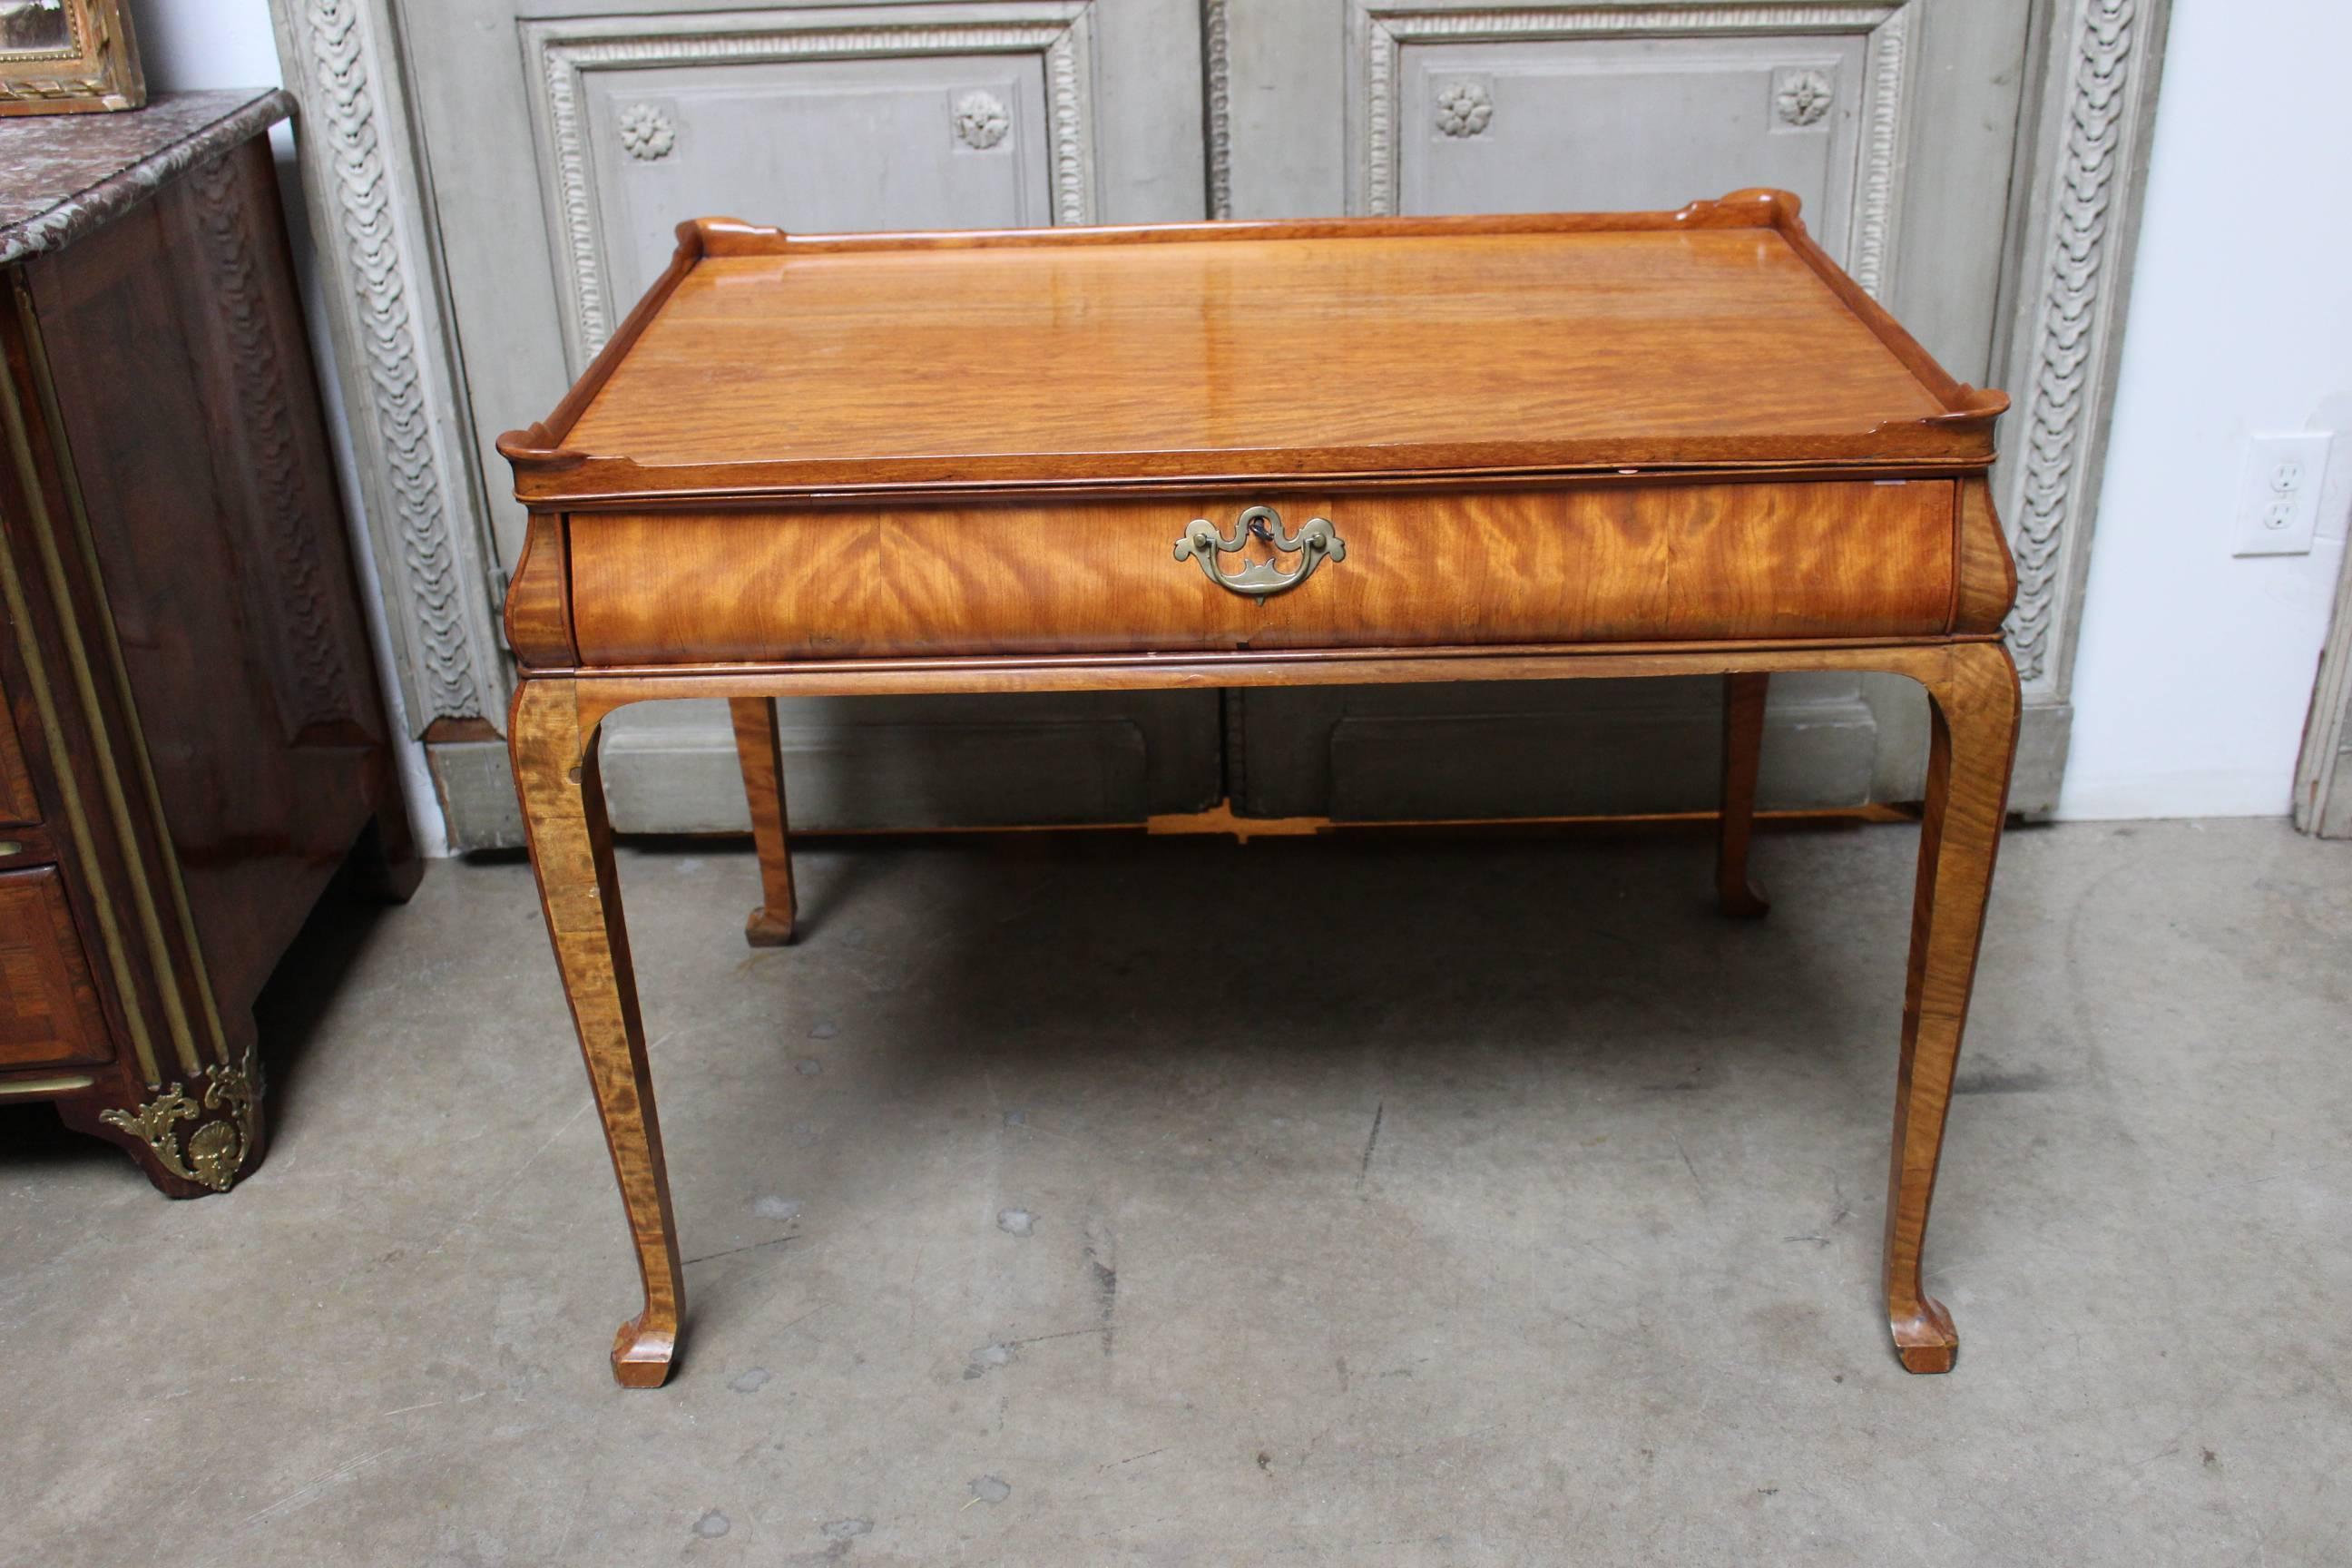 A Dutch satinwood tea table in the Queen Anne Style.